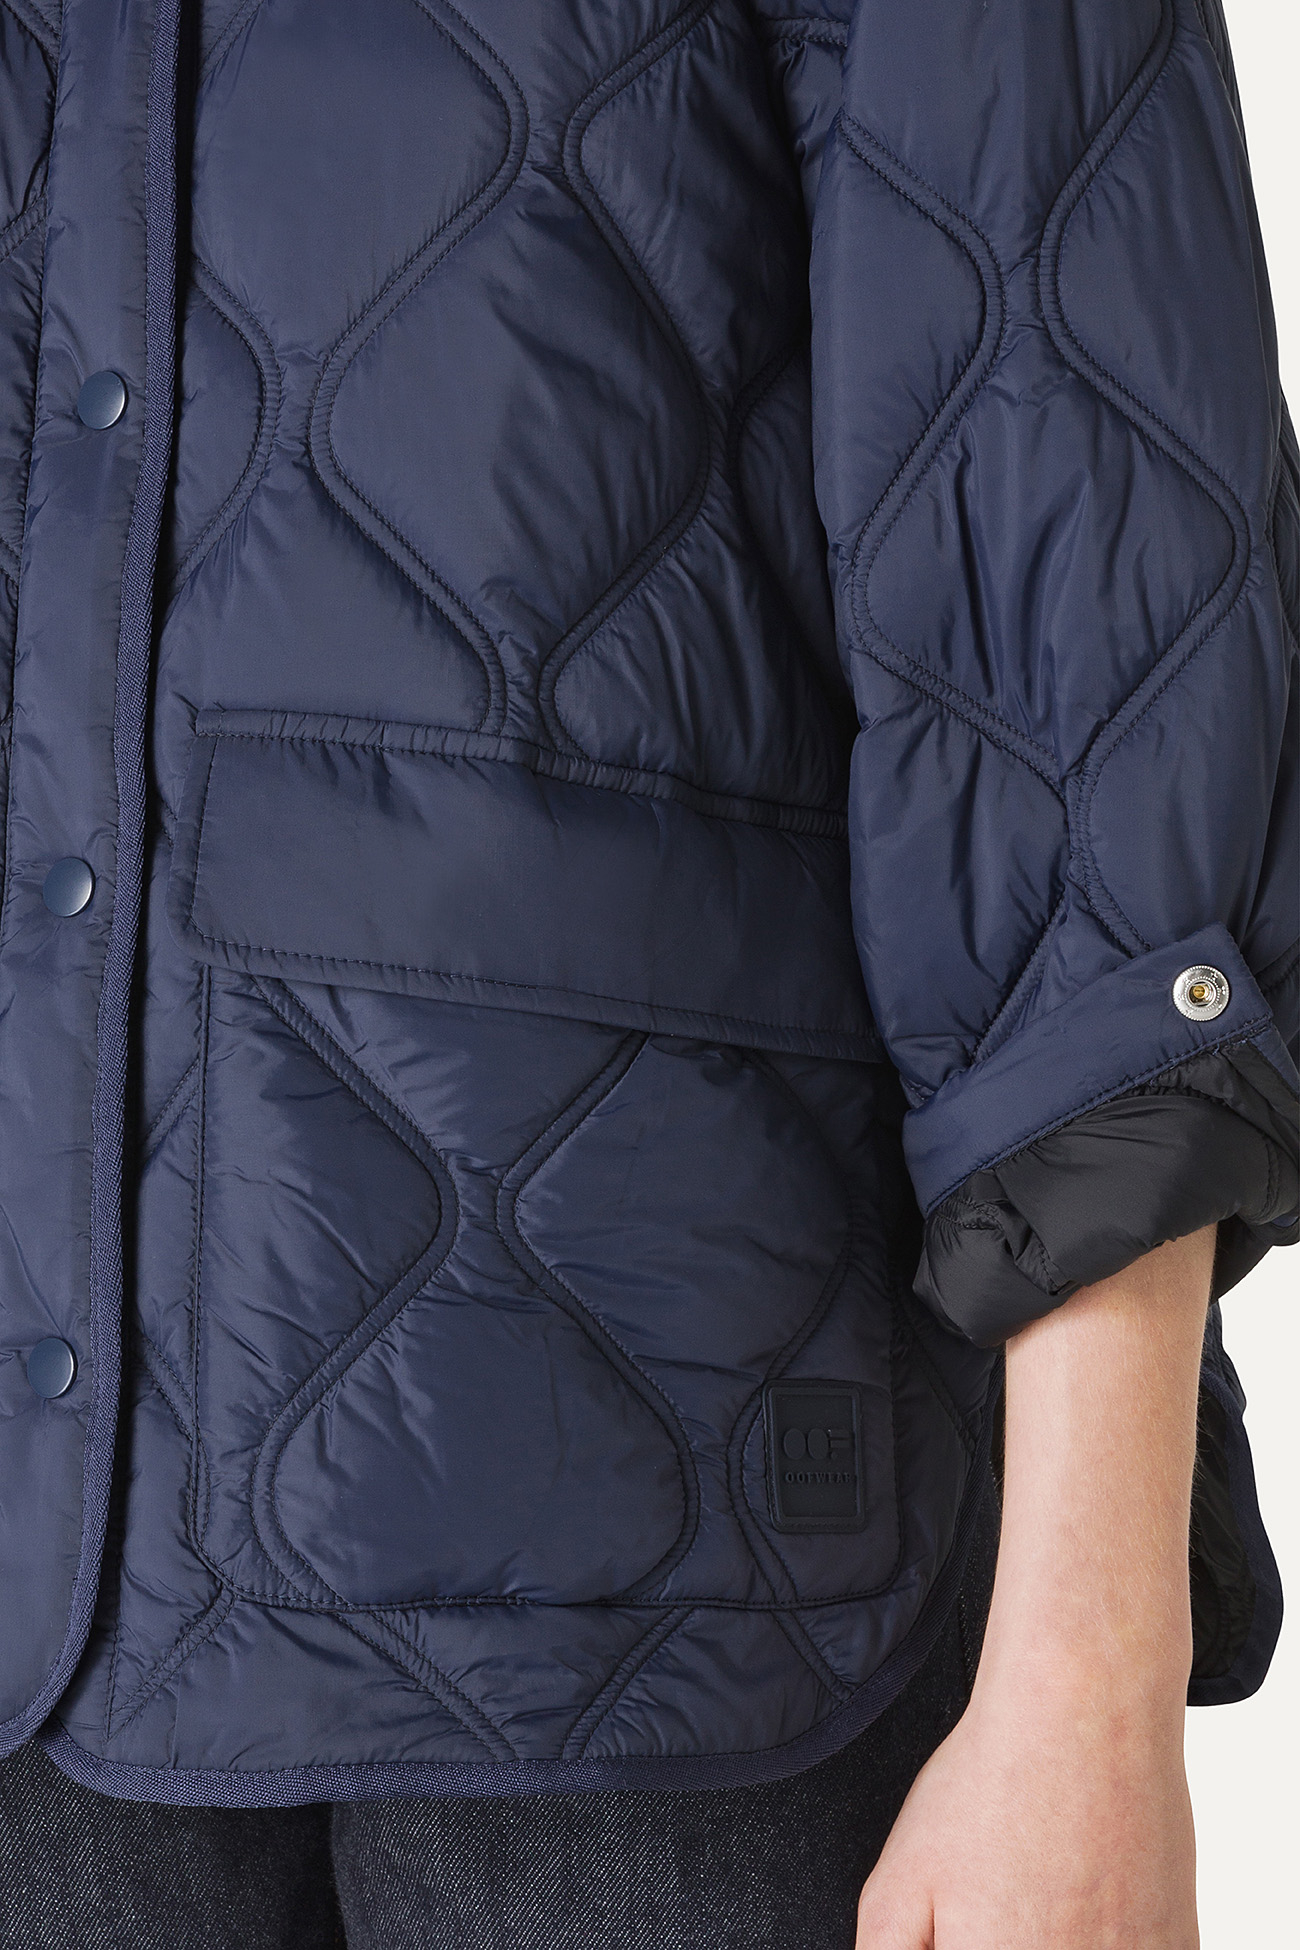 OVERSIZE SHACKET IN QUILTED LIGHT NYLON 9222 - MIDNIGHT BLUE - OOF WEAR